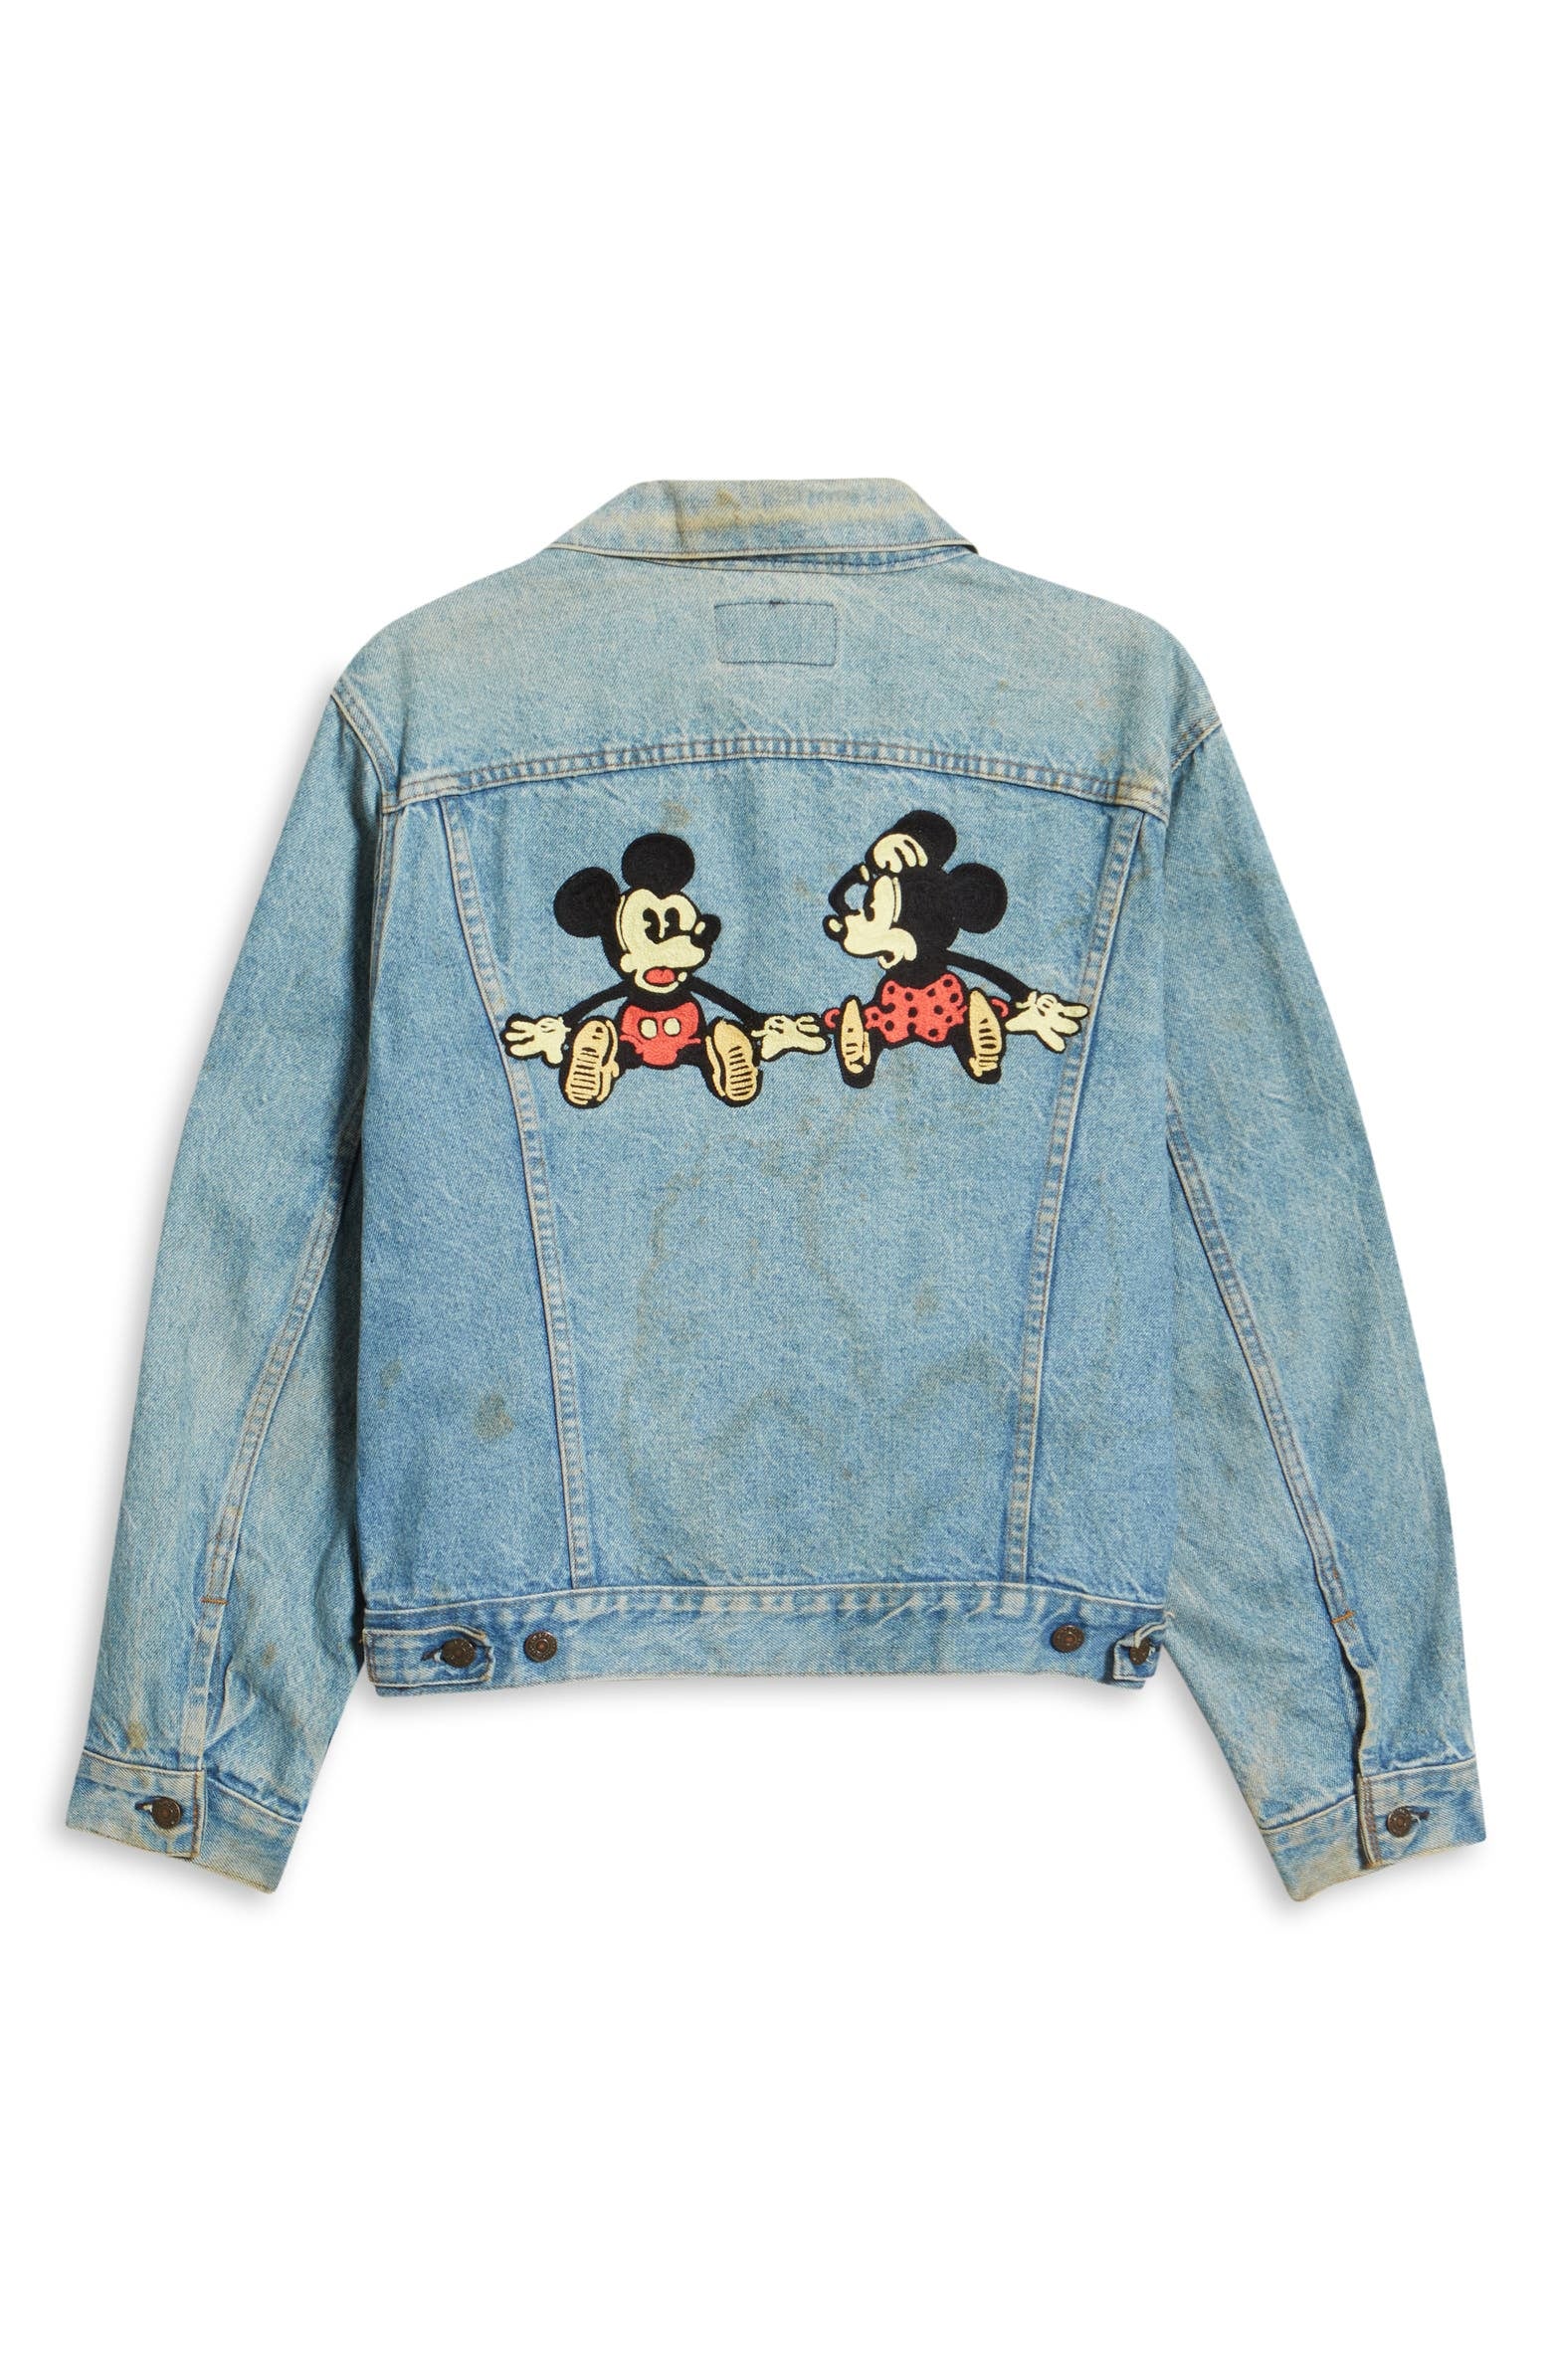 A Cute Denim Jacket: Disney x Levi's Unisex Reworked Vintage Mickey &  Minnie Mouse Denim Jacket | 16 Limited-Edition Pieces From Nordstrom's  Mickey and Friends Collection We Need | POPSUGAR Fashion Photo 2